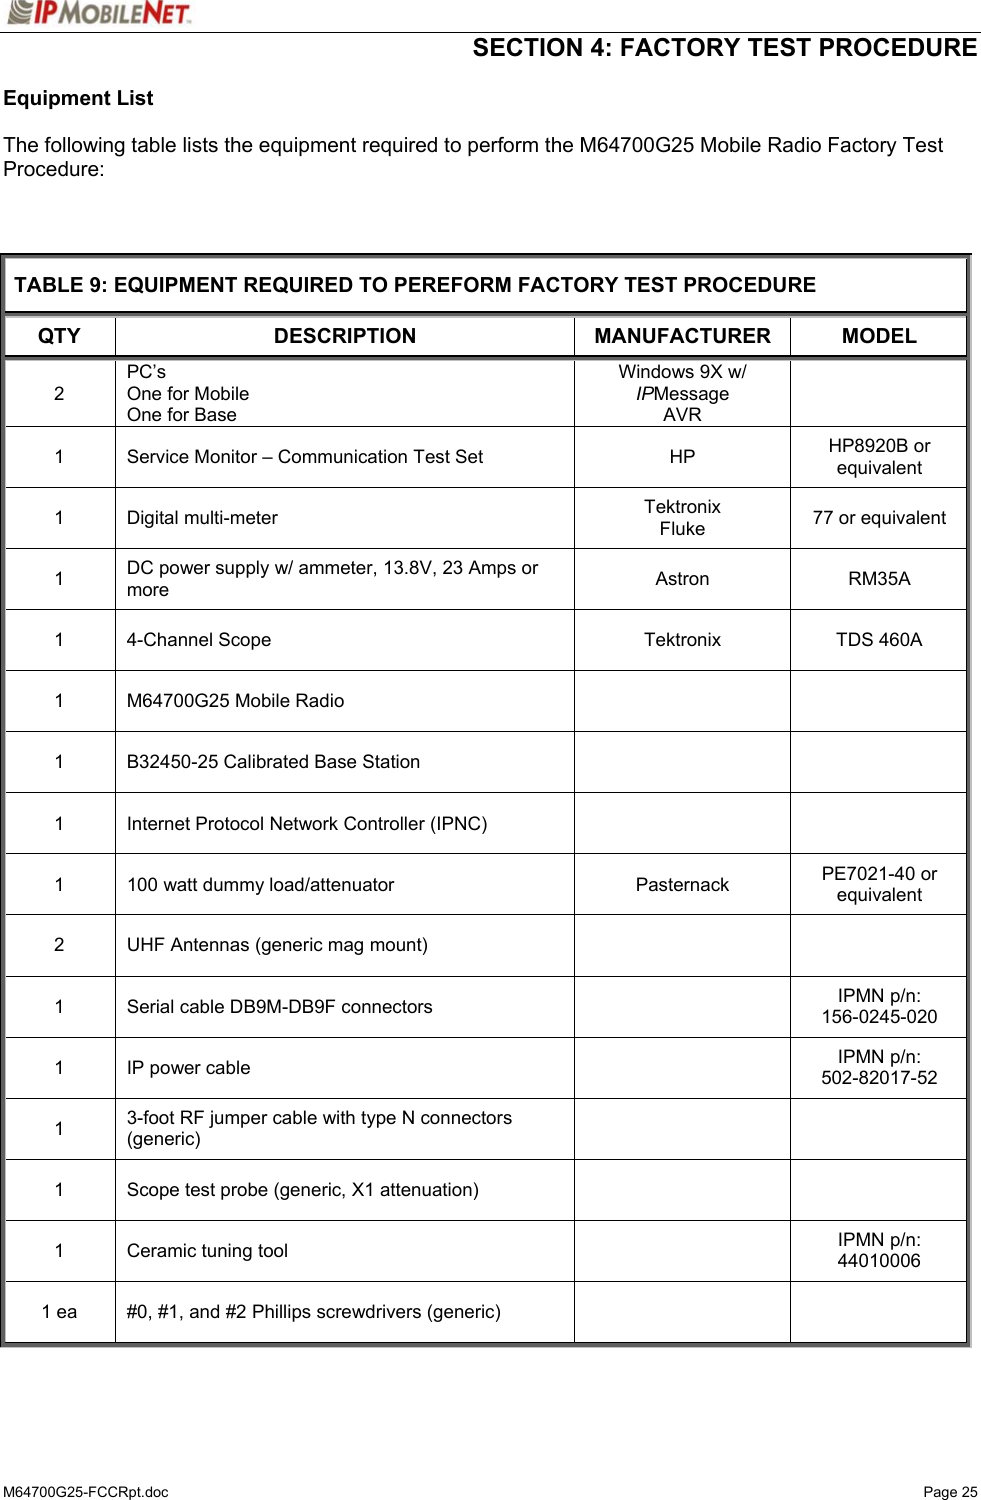  SECTION 4: FACTORY TEST PROCEDURE  M64700G25-FCCRpt.doc   Page 25 Equipment List   The following table lists the equipment required to perform the M64700G25 Mobile Radio Factory Test Procedure:    TABLE 9: EQUIPMENT REQUIRED TO PEREFORM FACTORY TEST PROCEDURE QTY DESCRIPTION MANUFACTURER MODEL 2 PC’s One for Mobile One for Base Windows 9X w/  IPMessage AVR  1  Service Monitor – Communication Test Set  HP  HP8920B or equivalent 1 Digital multi-meter  Tektronix Fluke  77 or equivalent 1  DC power supply w/ ammeter, 13.8V, 23 Amps or more  Astron  RM35A   1  4-Channel Scope  Tektronix  TDS 460A 1  M64700G25 Mobile Radio     1  B32450-25 Calibrated Base Station     1  Internet Protocol Network Controller (IPNC)     1  100 watt dummy load/attenuator  Pasternack  PE7021-40 or equivalent 2  UHF Antennas (generic mag mount)     1  Serial cable DB9M-DB9F connectors    IPMN p/n:  156-0245-020 1  IP power cable    IPMN p/n: 502-82017-52 1  3-foot RF jumper cable with type N connectors (generic)    1  Scope test probe (generic, X1 attenuation)     1  Ceramic tuning tool    IPMN p/n: 44010006 1 ea  #0, #1, and #2 Phillips screwdrivers (generic)        